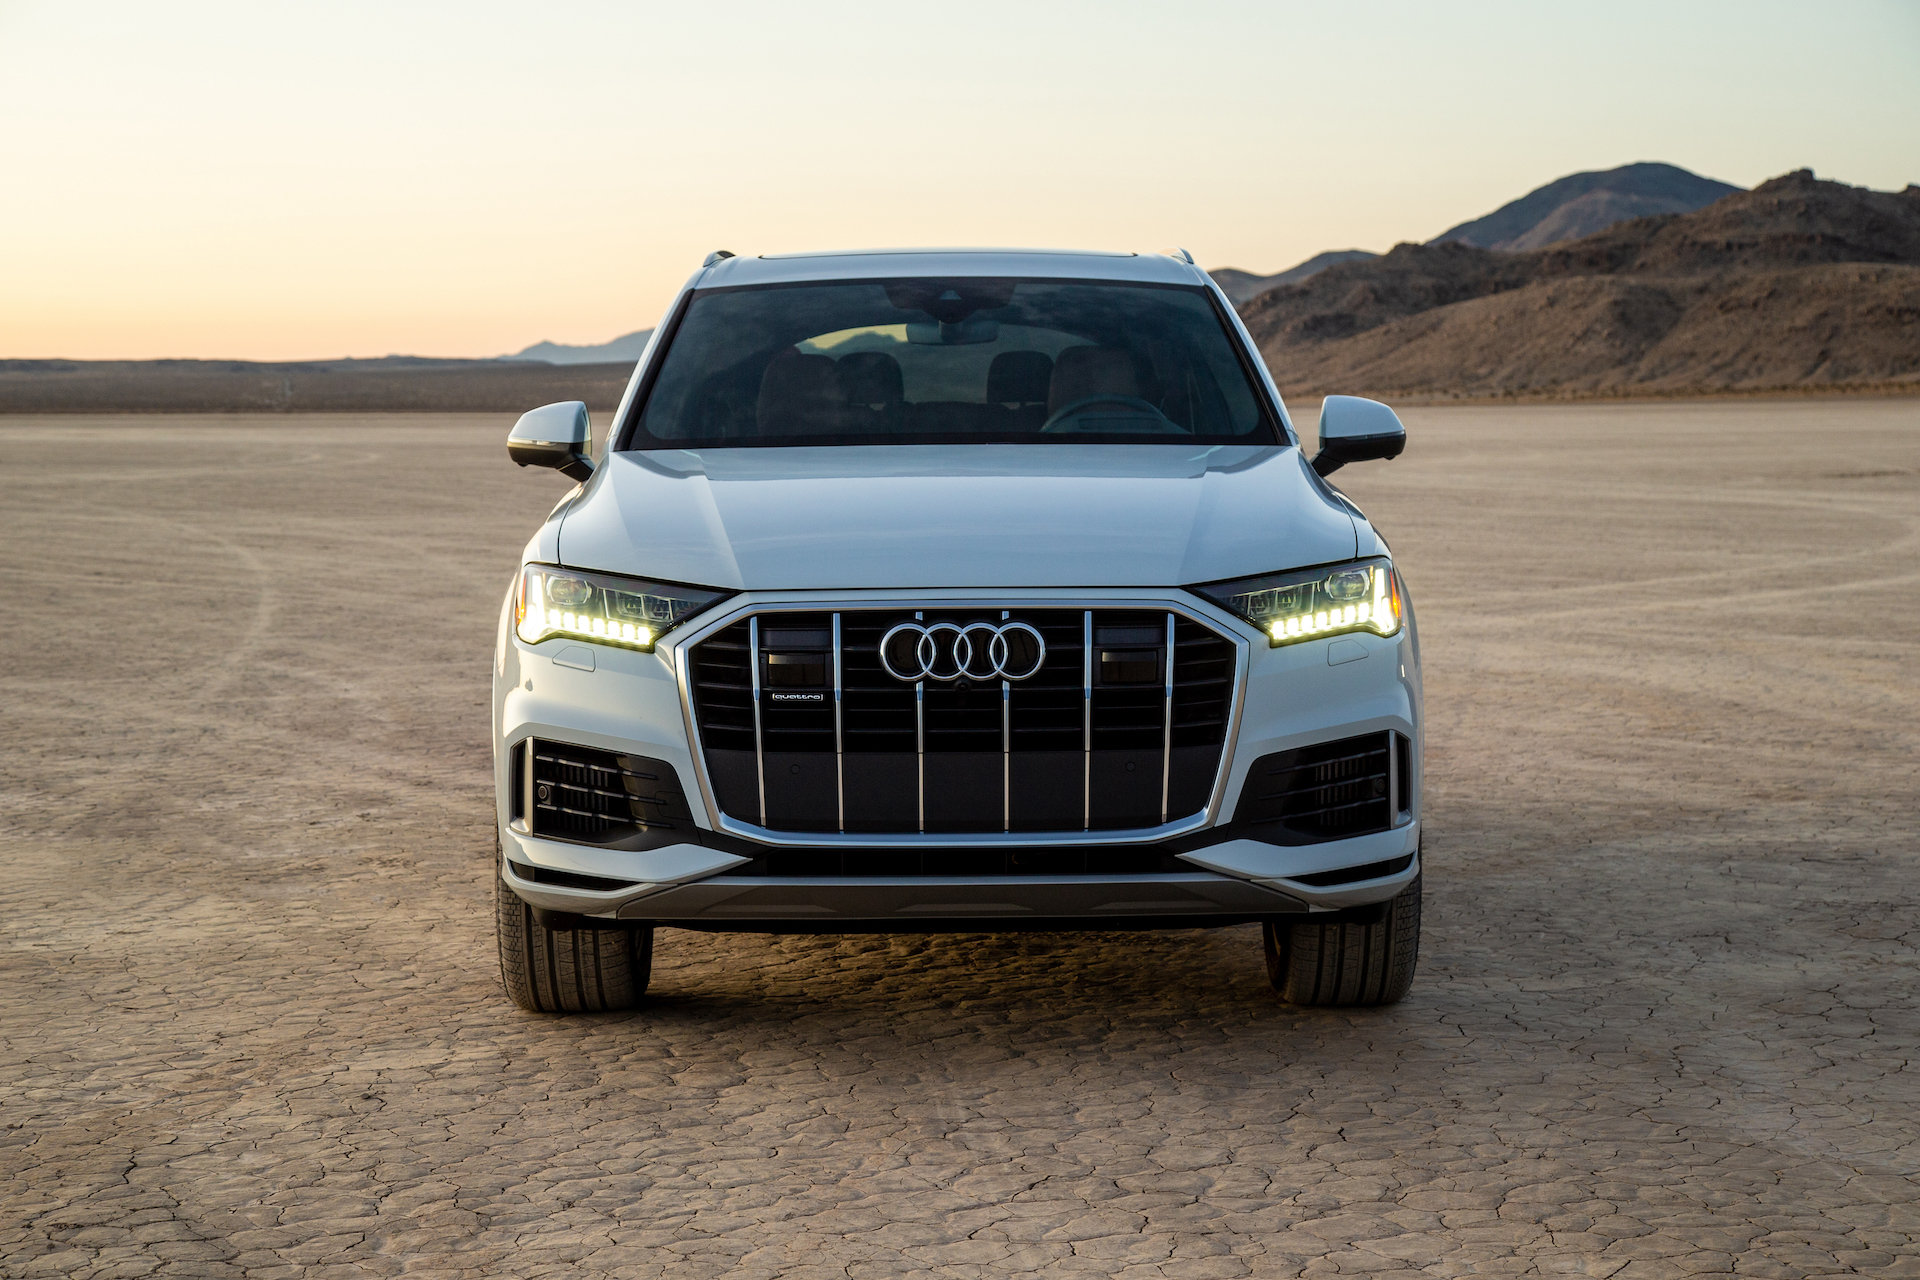 Audi Q9 full size SUV reportedly confirmed to dealers for launch